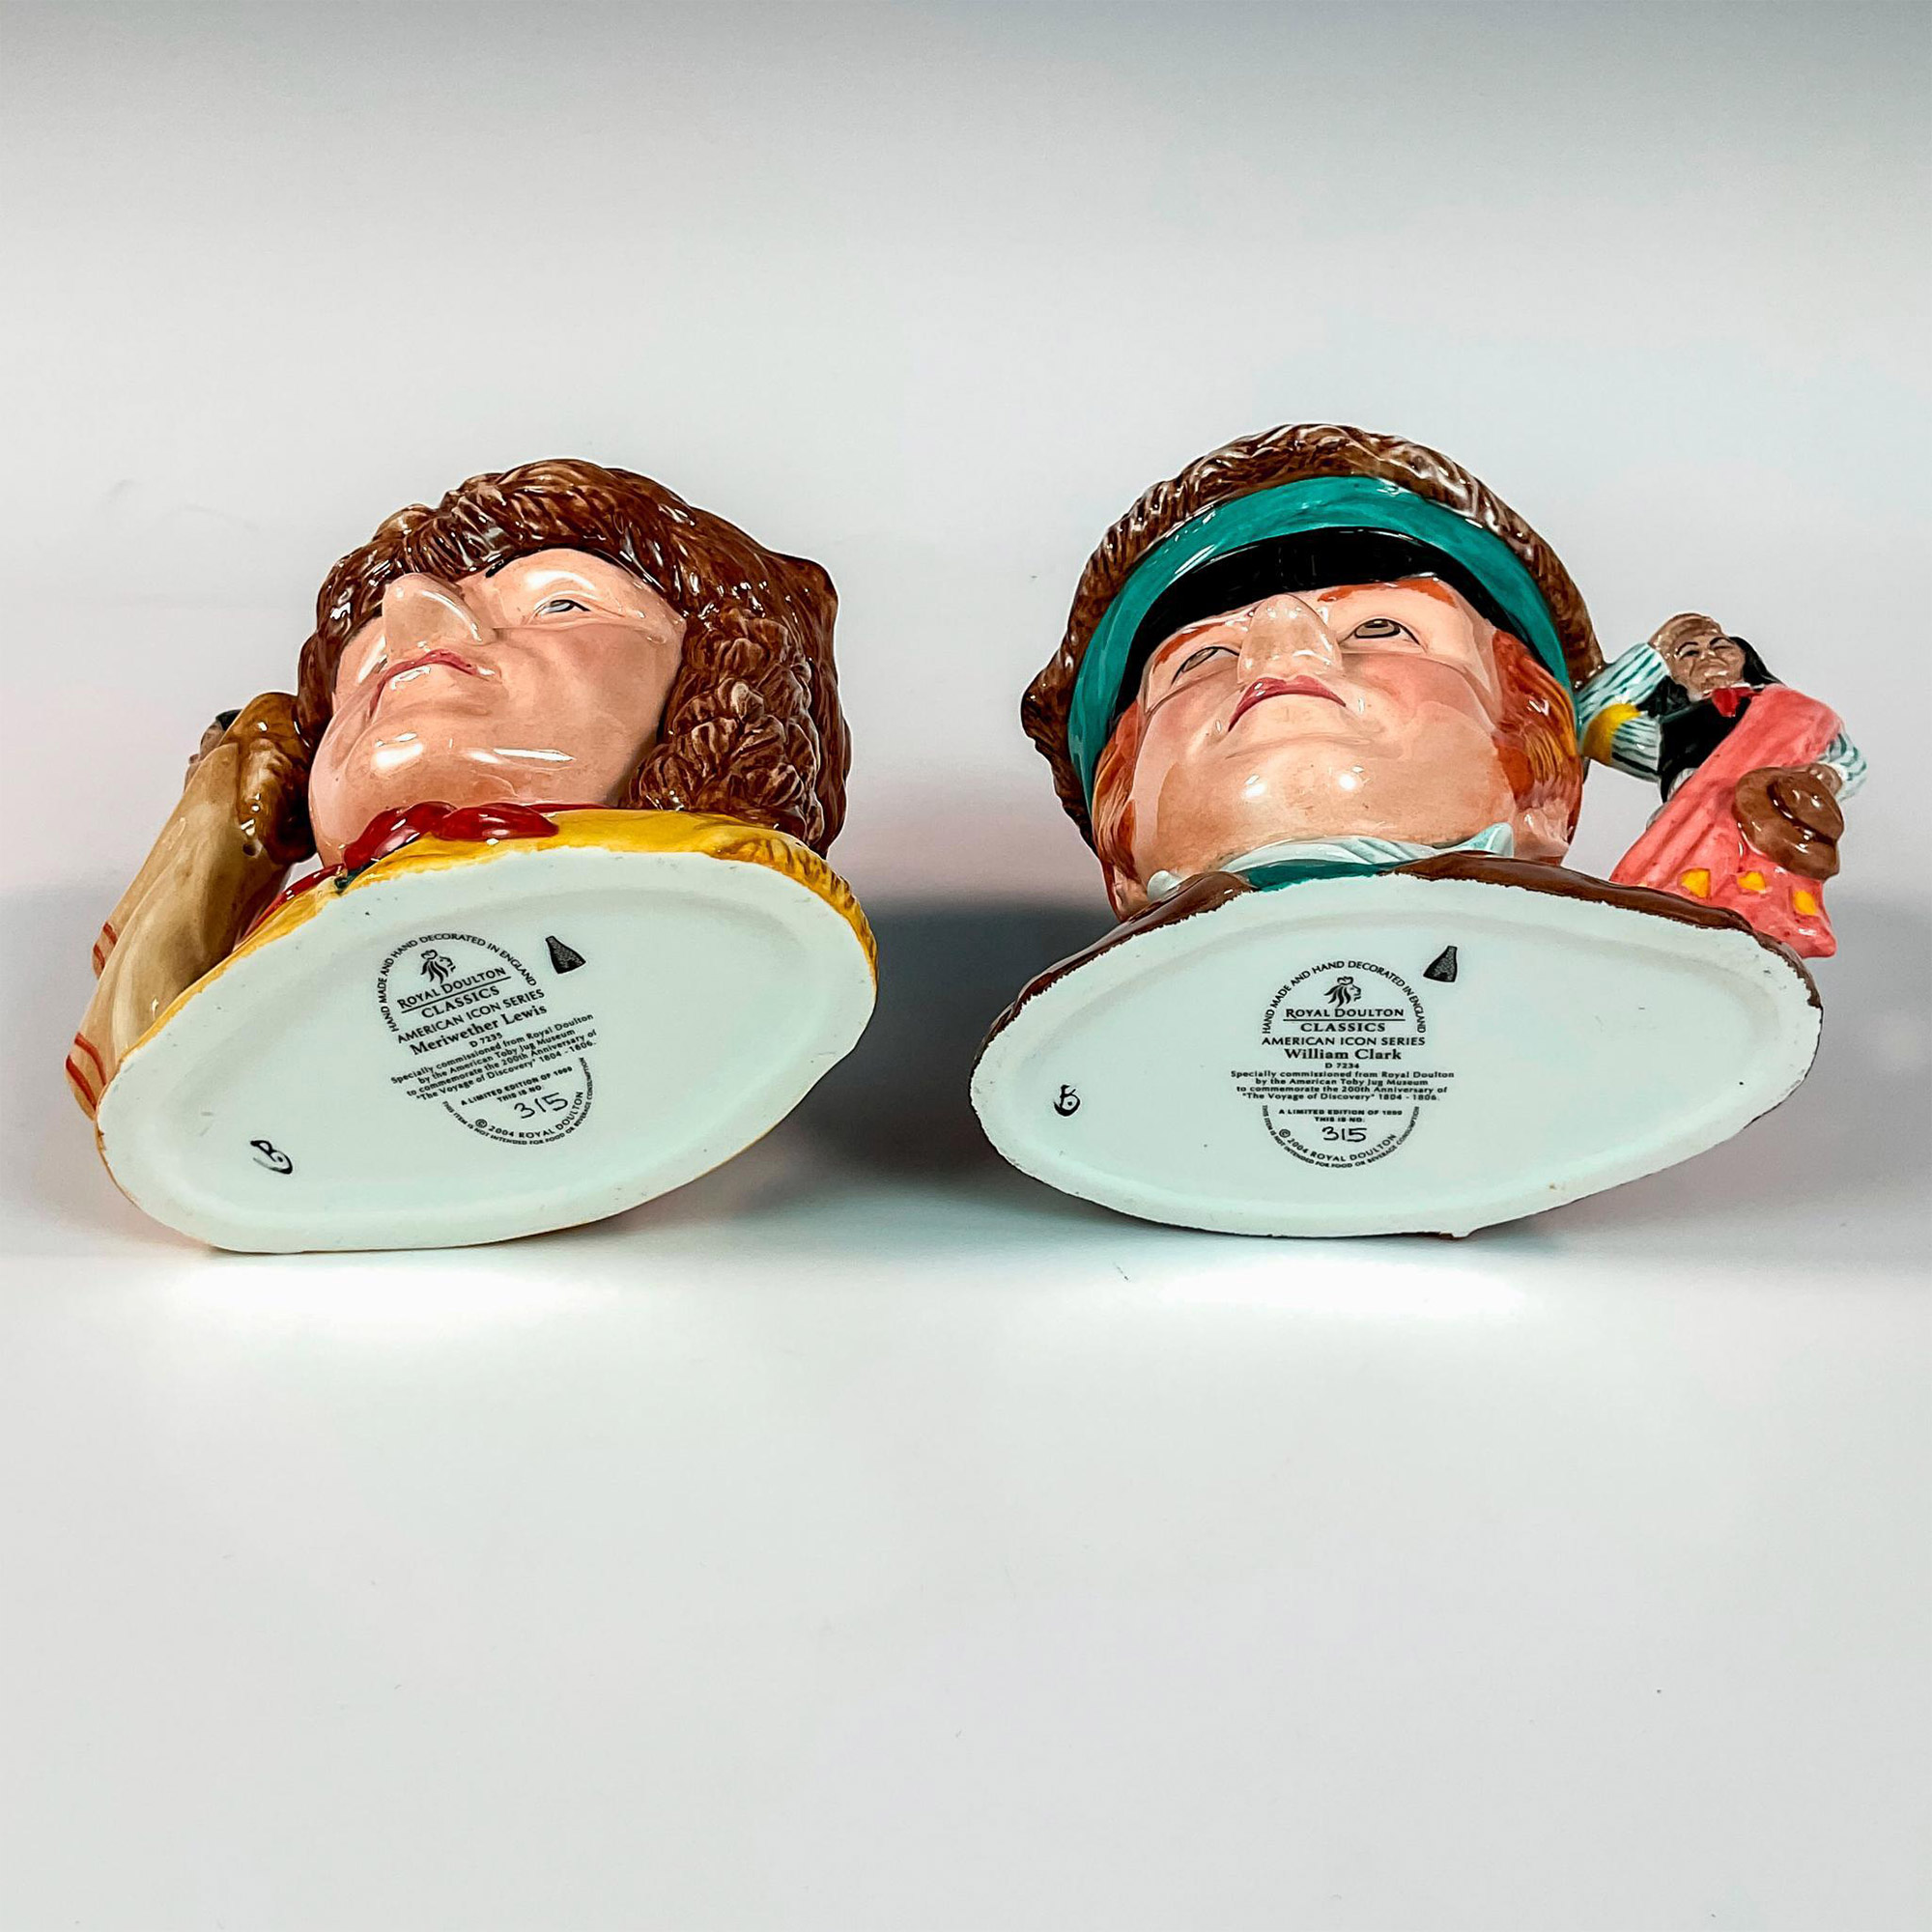 2pc Meriwether Lewis and William Clark Pair D7235 & D7234 - Medium - Royal Doulton Character Jugs - Image 3 of 3